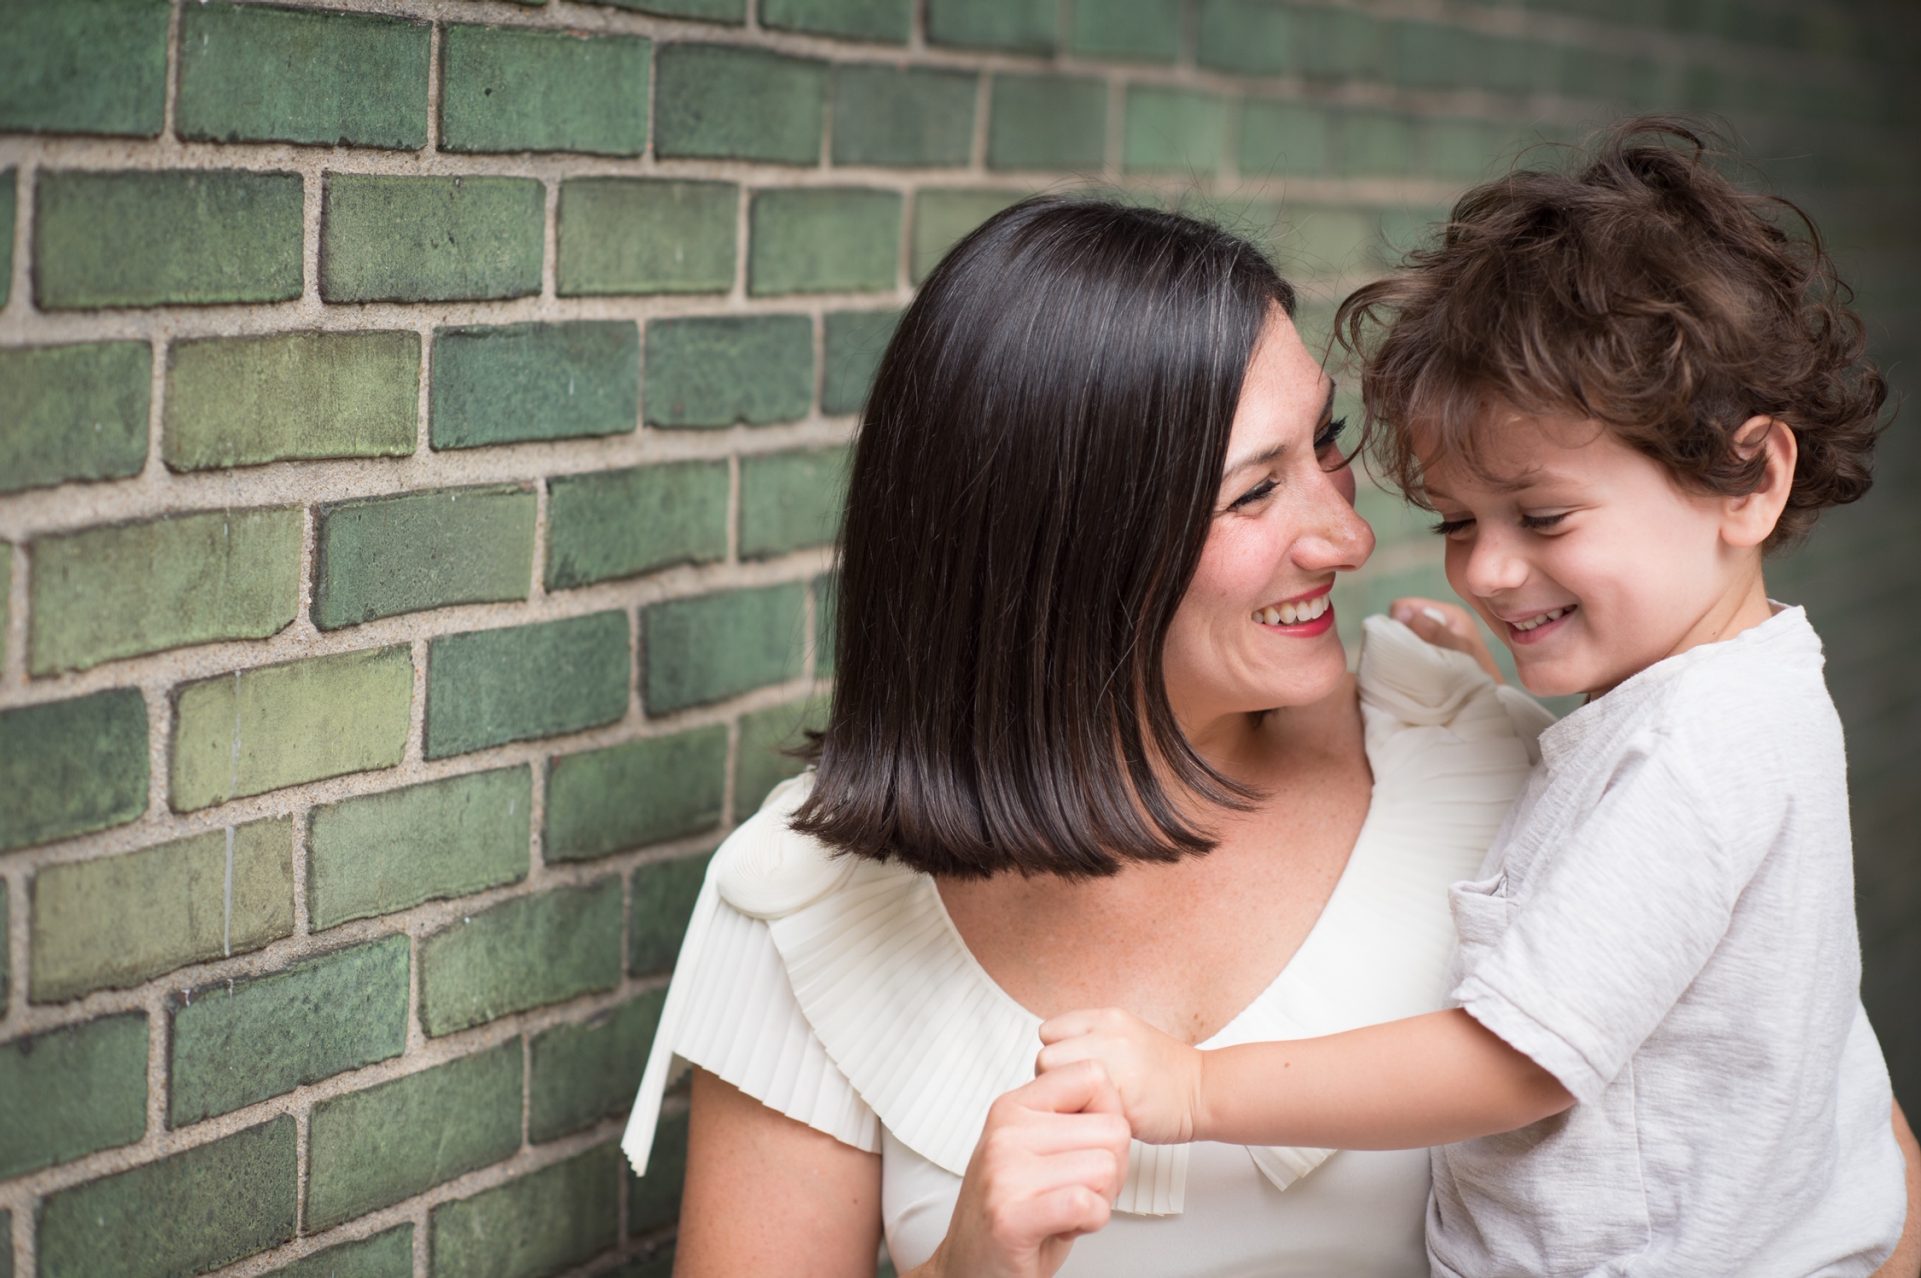  A mother and her young child, wearing white shirts, hugging each other in front of a grey brick wall 